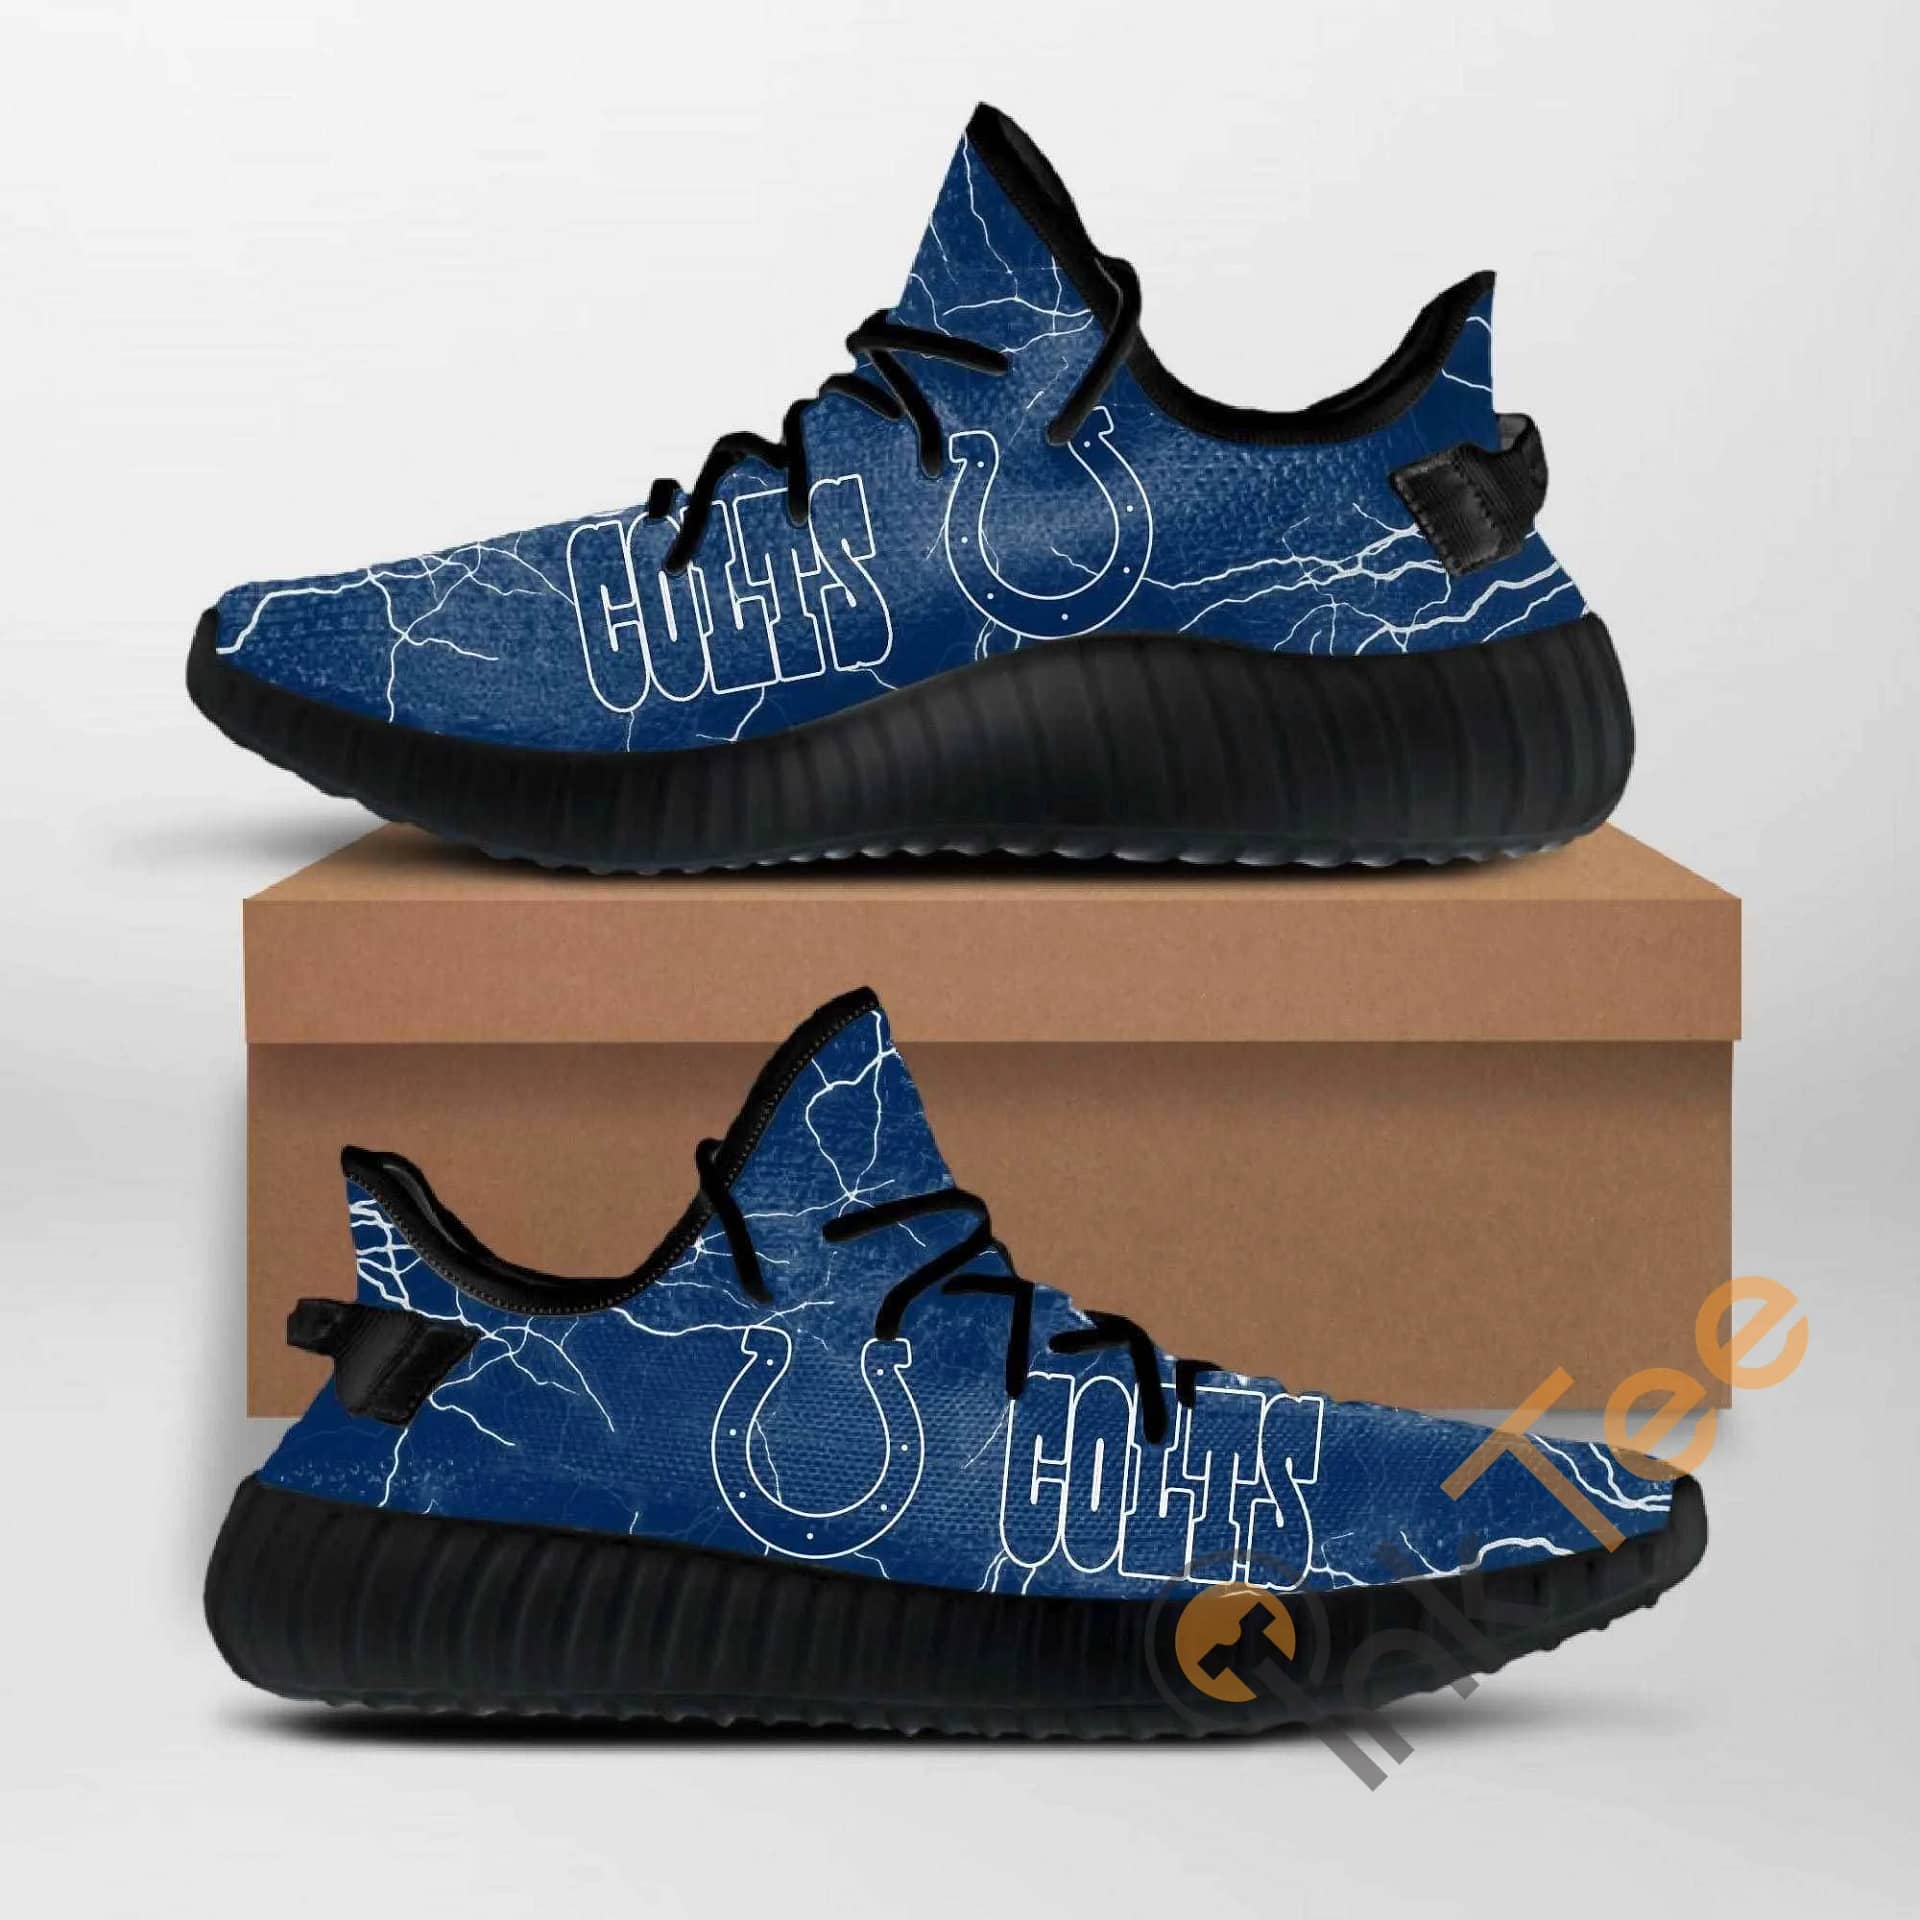 Indianapolis Colts Nfl Amazon Best Selling Yeezy Boost